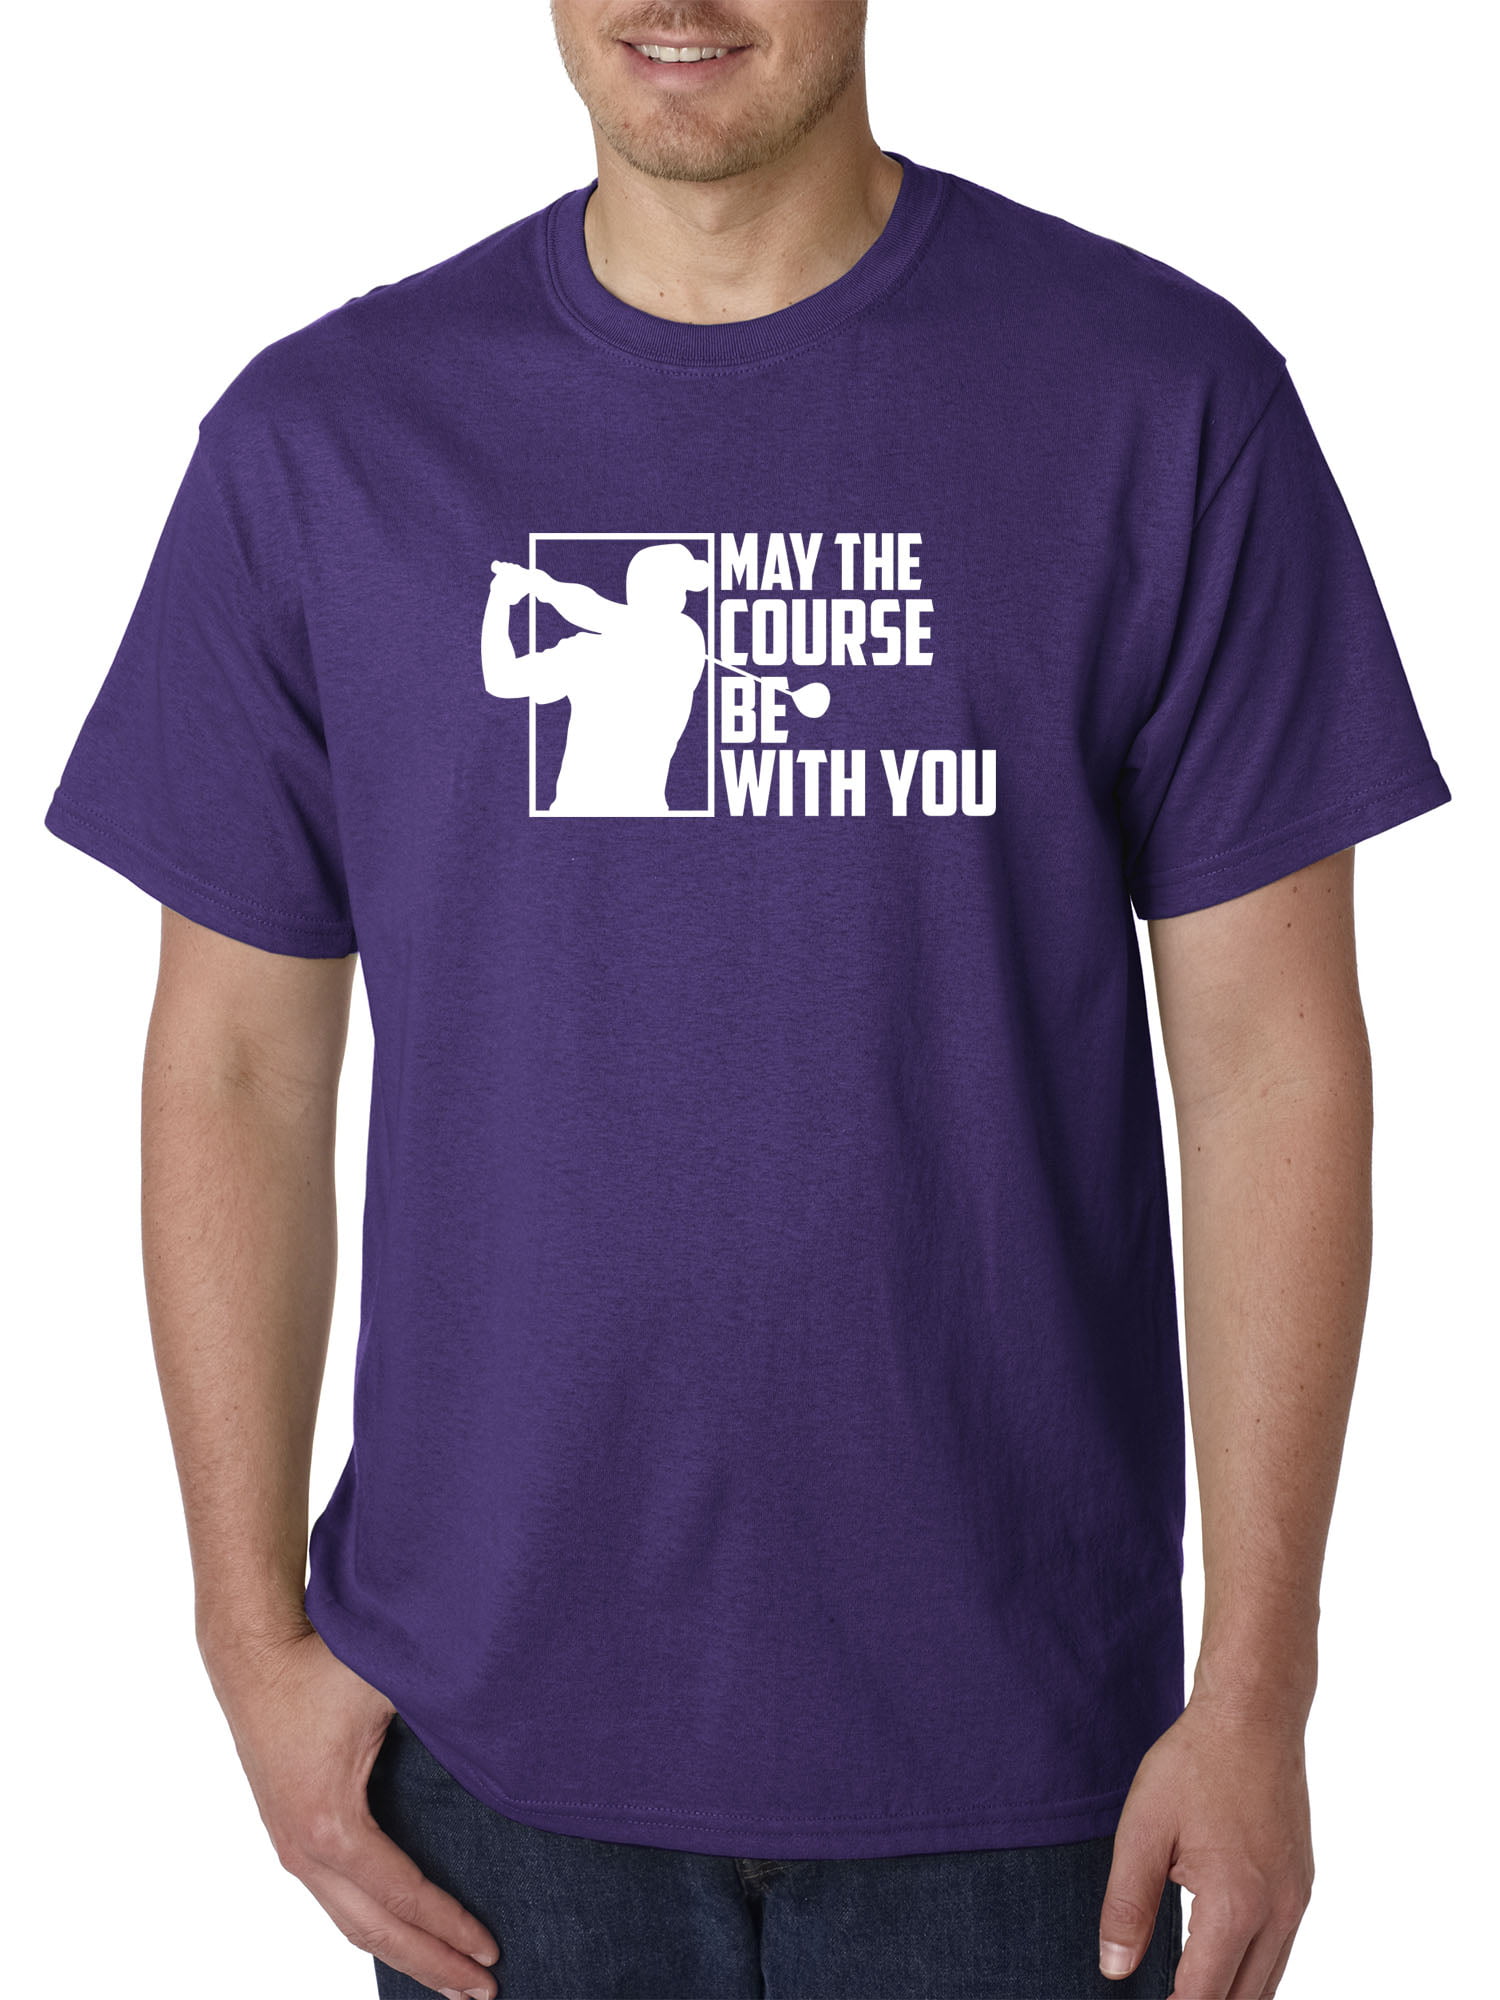 Details about   May The Horsepower Be With You T Shirt Small-5XL 16 Different Colours 